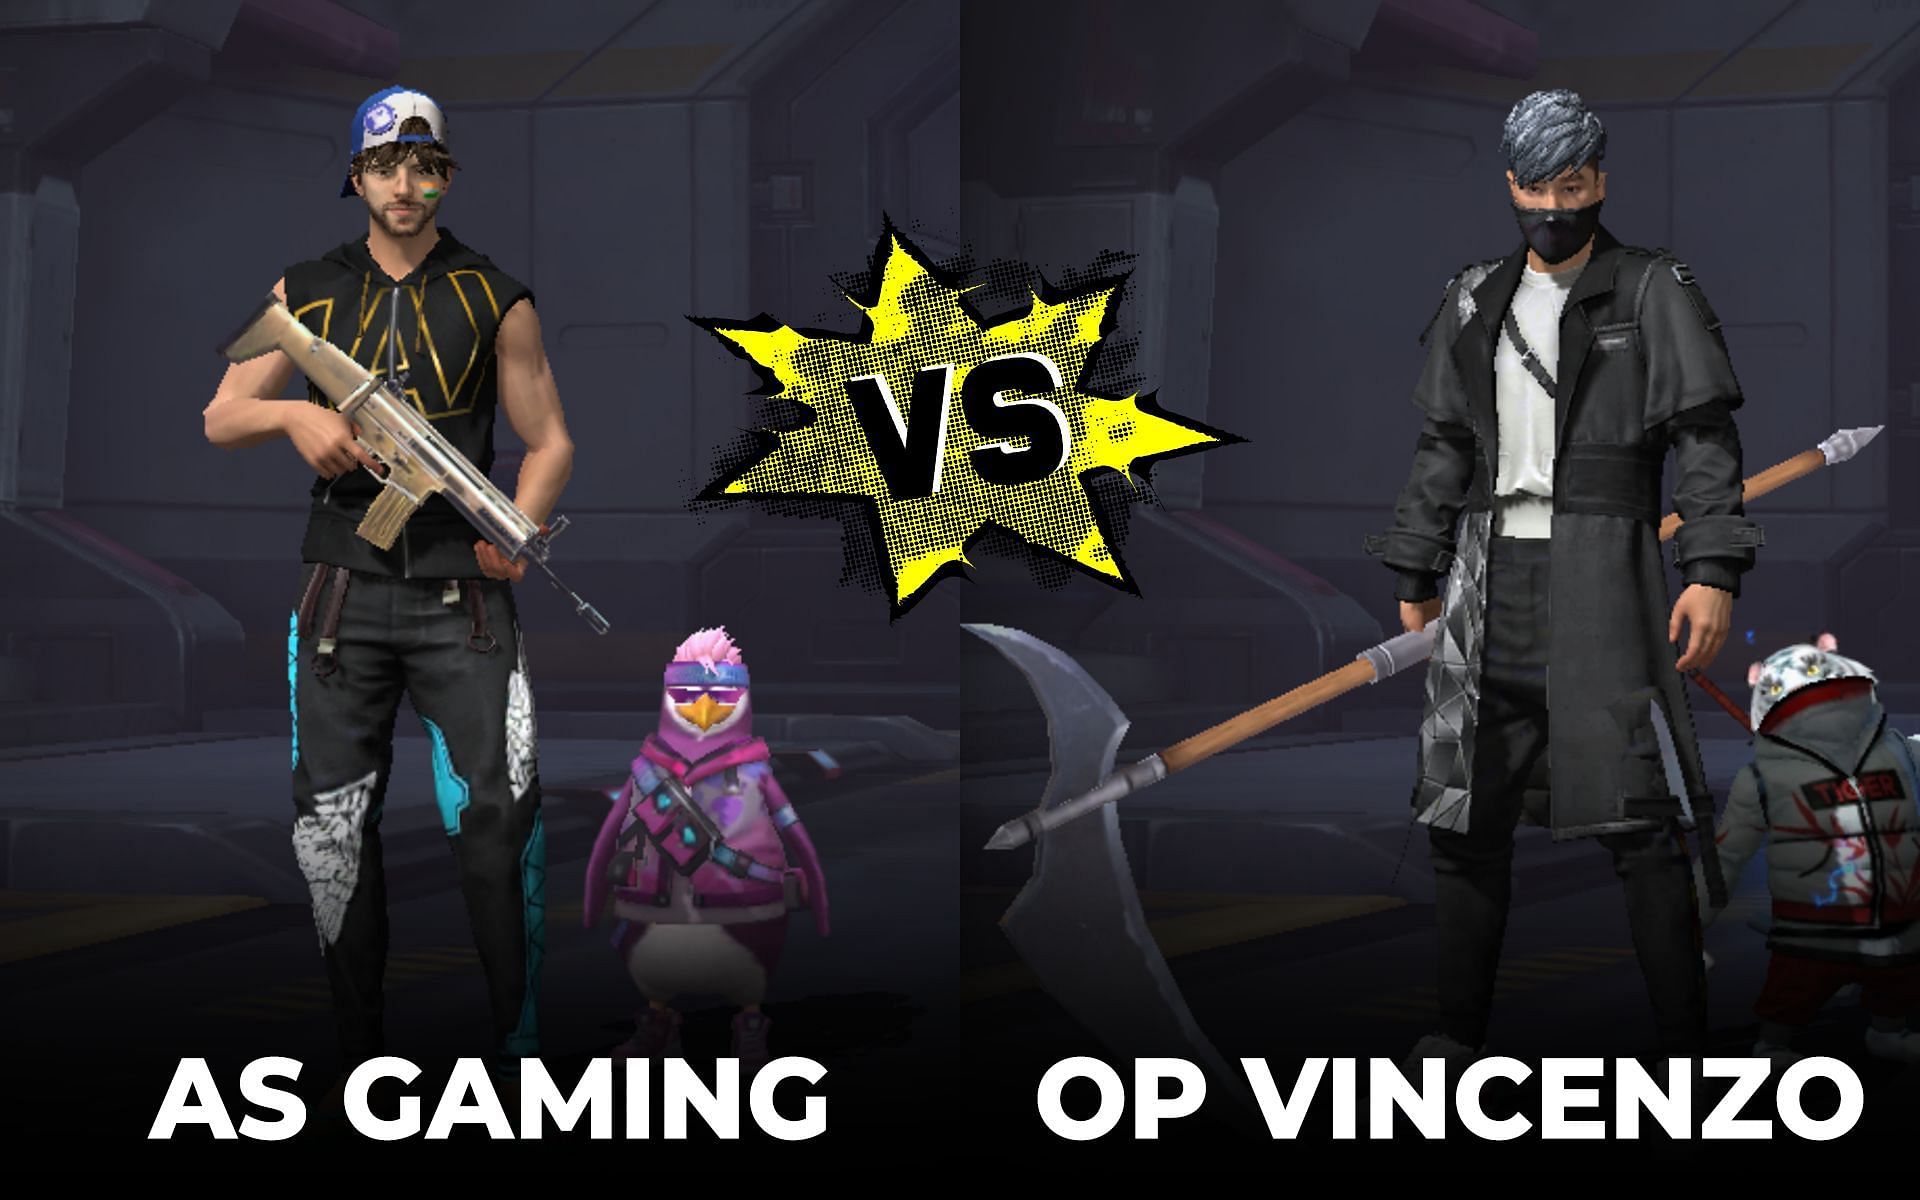 AS Gaming vs OP Vincenzo - Comparing Free Fire stats of the two gamers (Image via Garena)